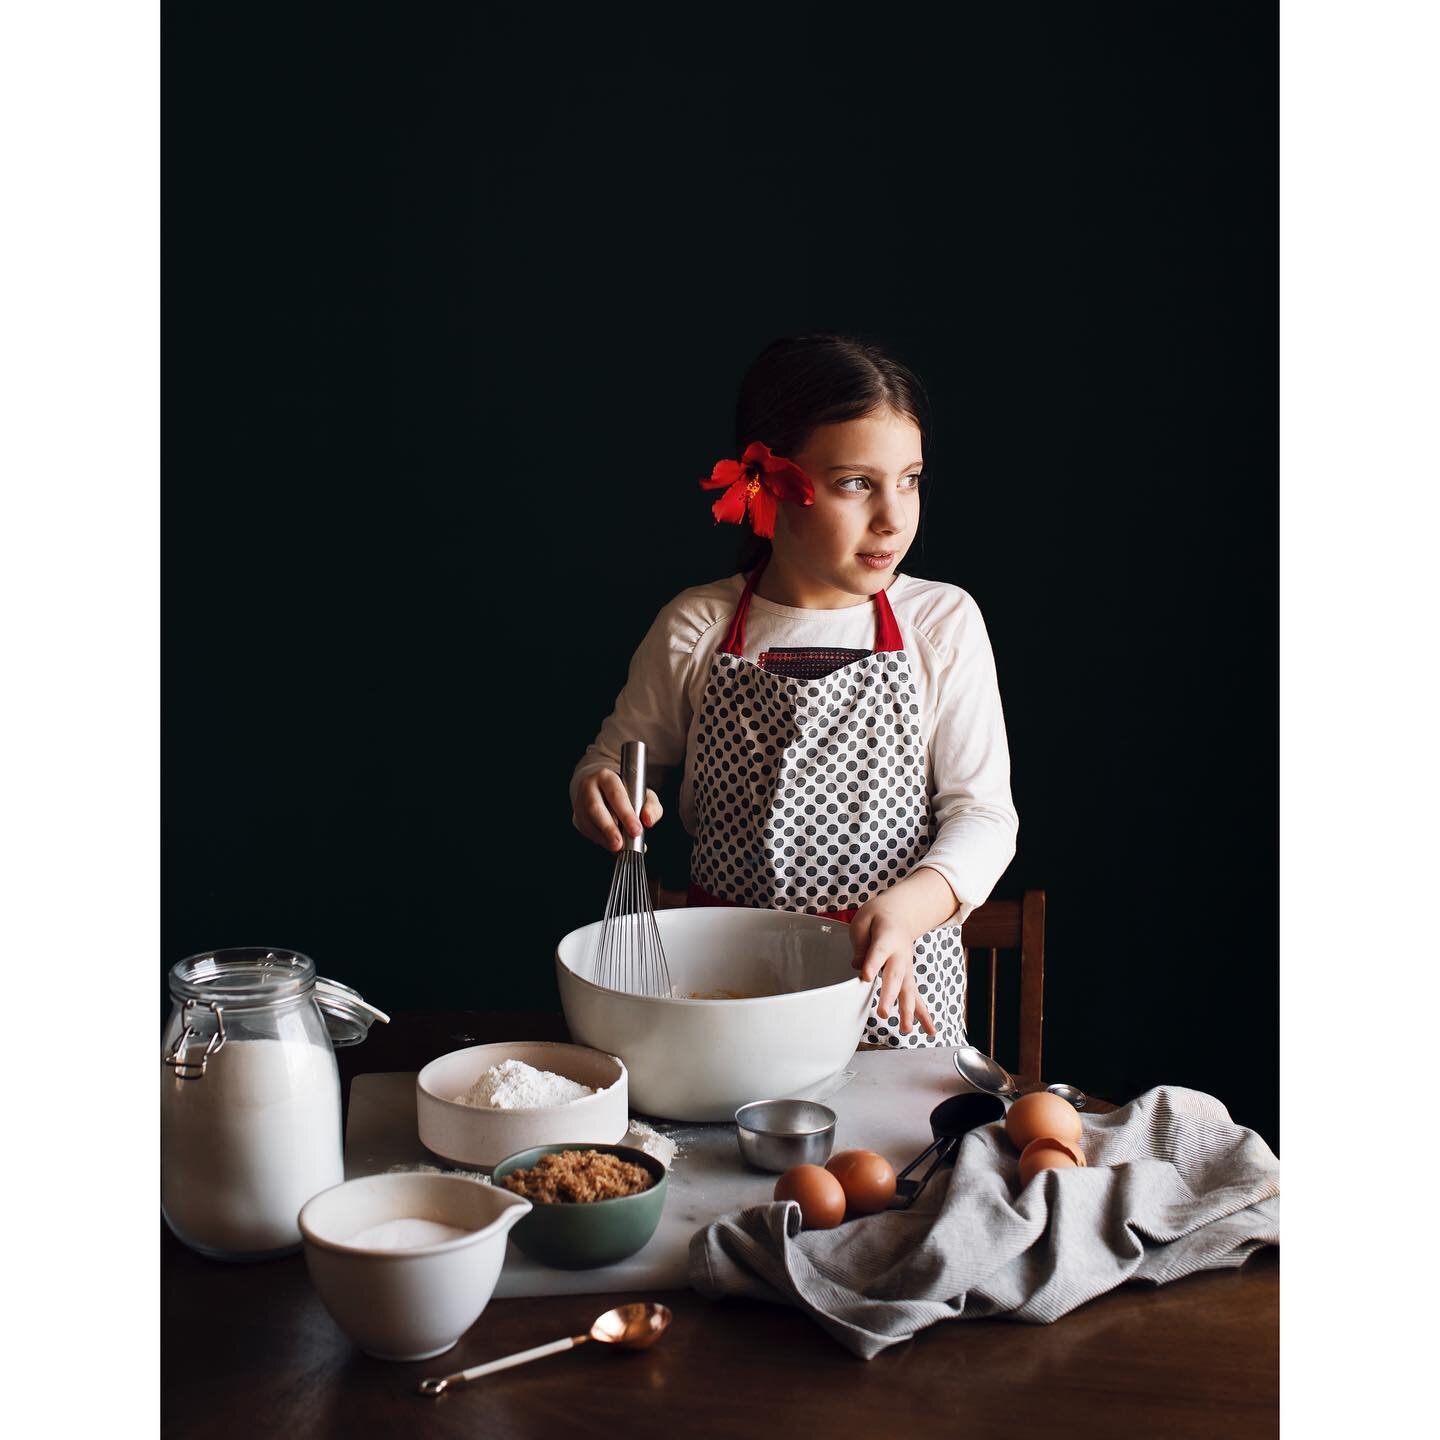 Day 82.
Stella bakes again. 
:
Winter break for our kiddos has officially begun. Much needed after &ldquo;busy season&rdquo; subsides. I&rsquo;m so looking forward to staying in pjs way too late, make baking messes and cooking up a storm these next t